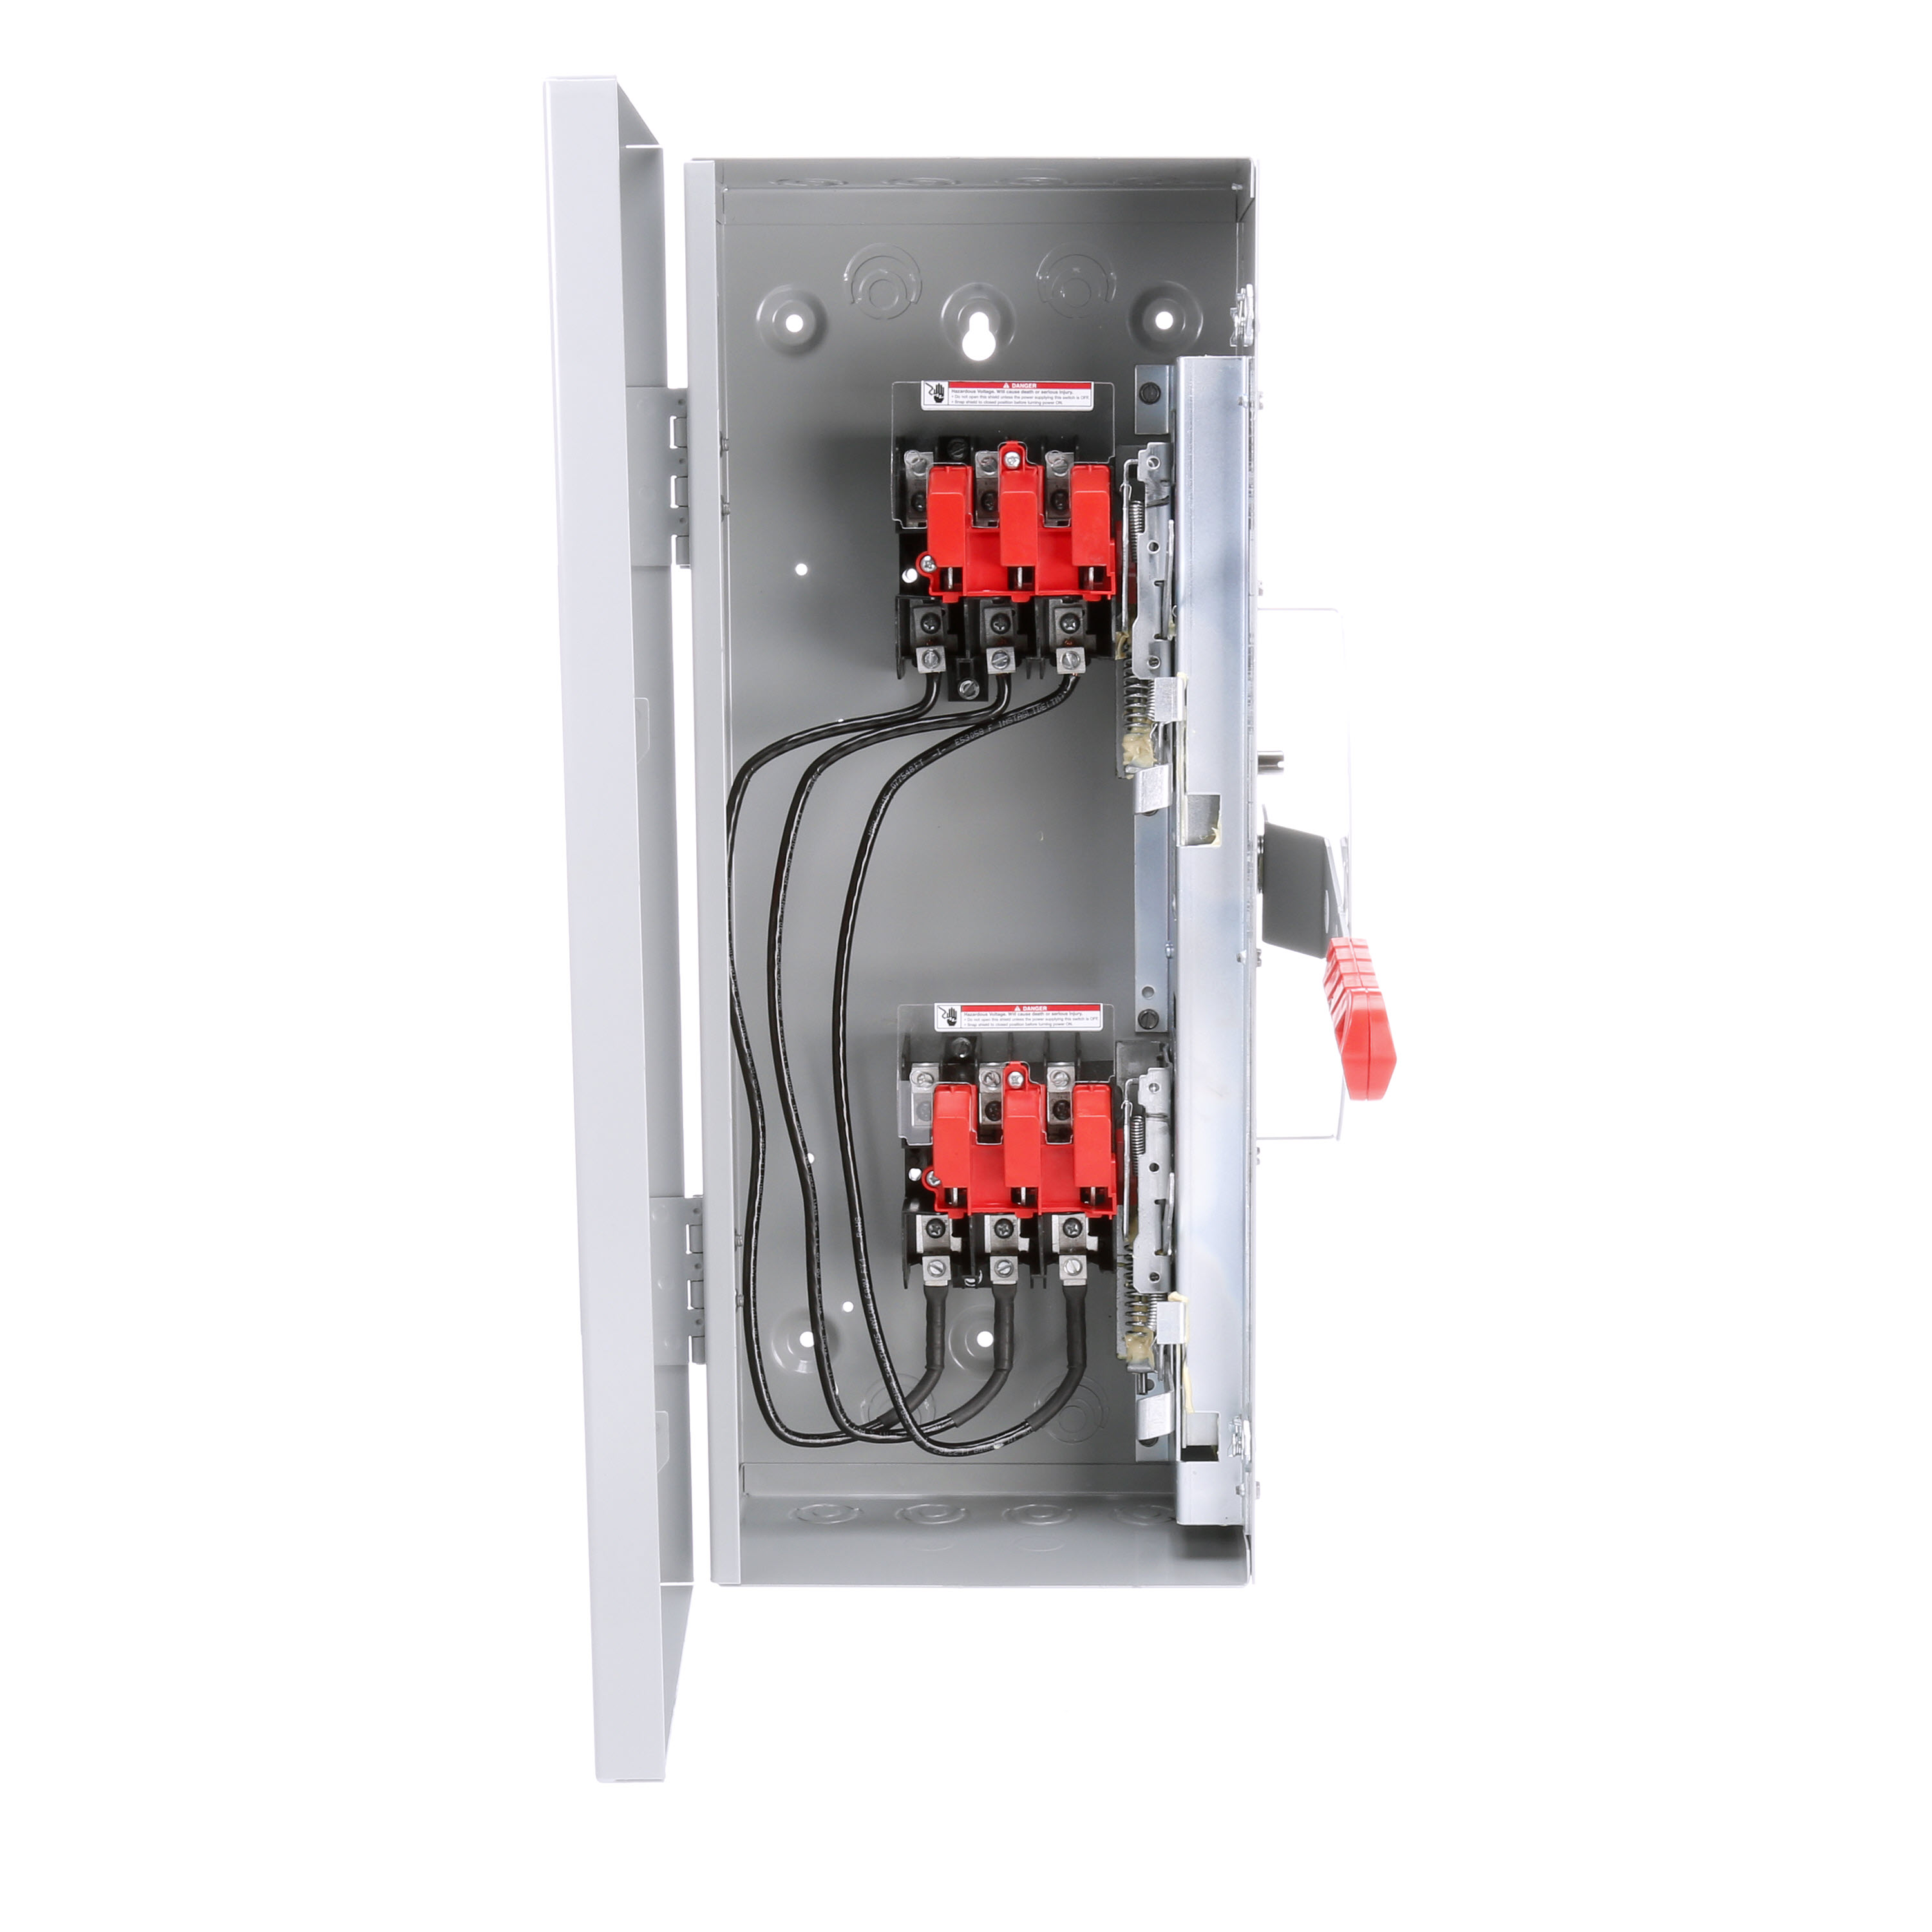 Siemens Low Voltage Circuit Protection Heavy Duty Safety Switches. 30A 3P 240V 3W NF DT TYPE 1